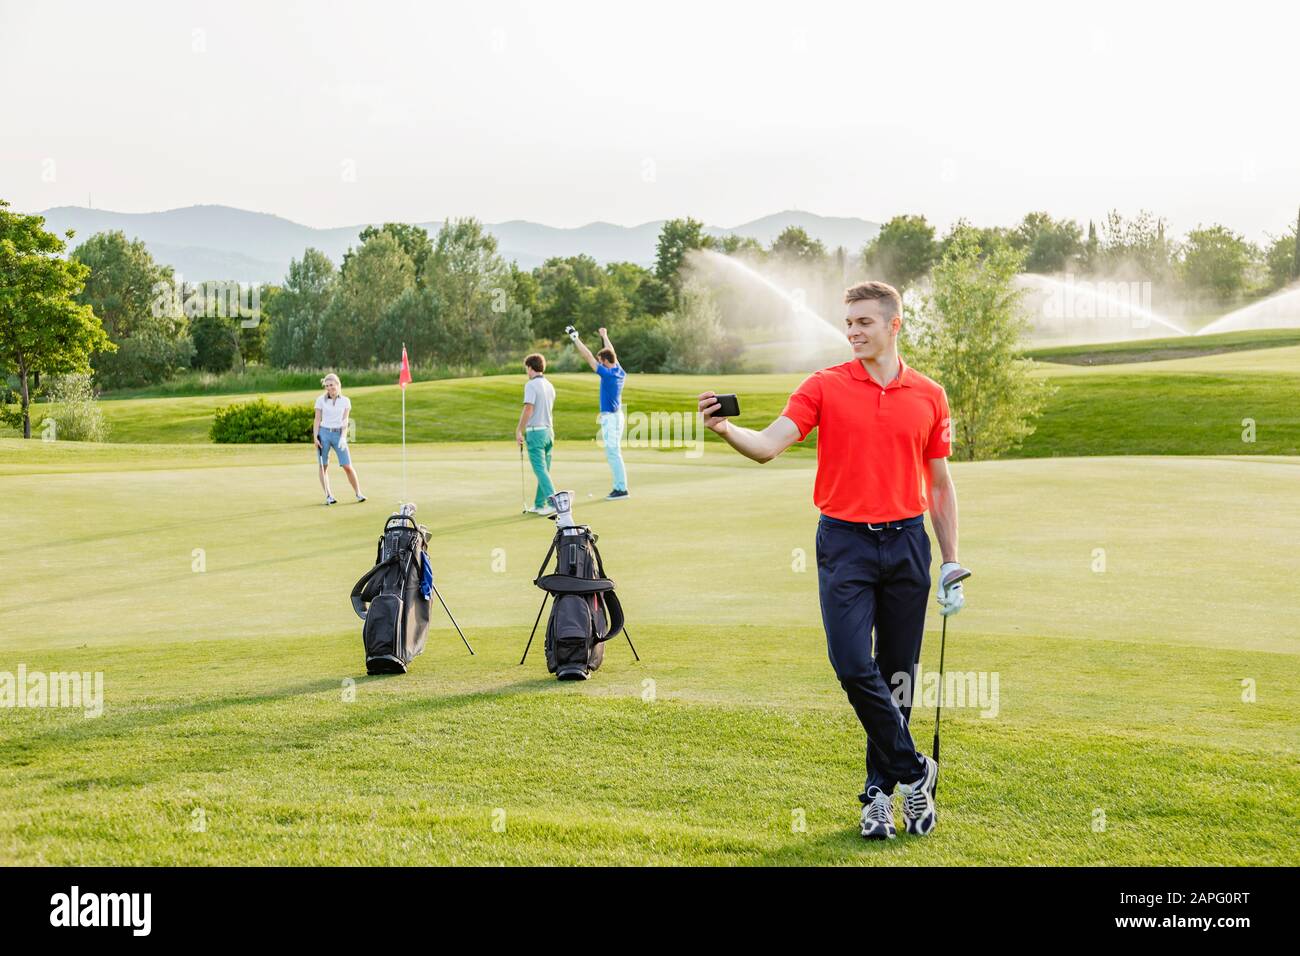 Man taking selfie on golf course, friends playing golf in background Stock Photo